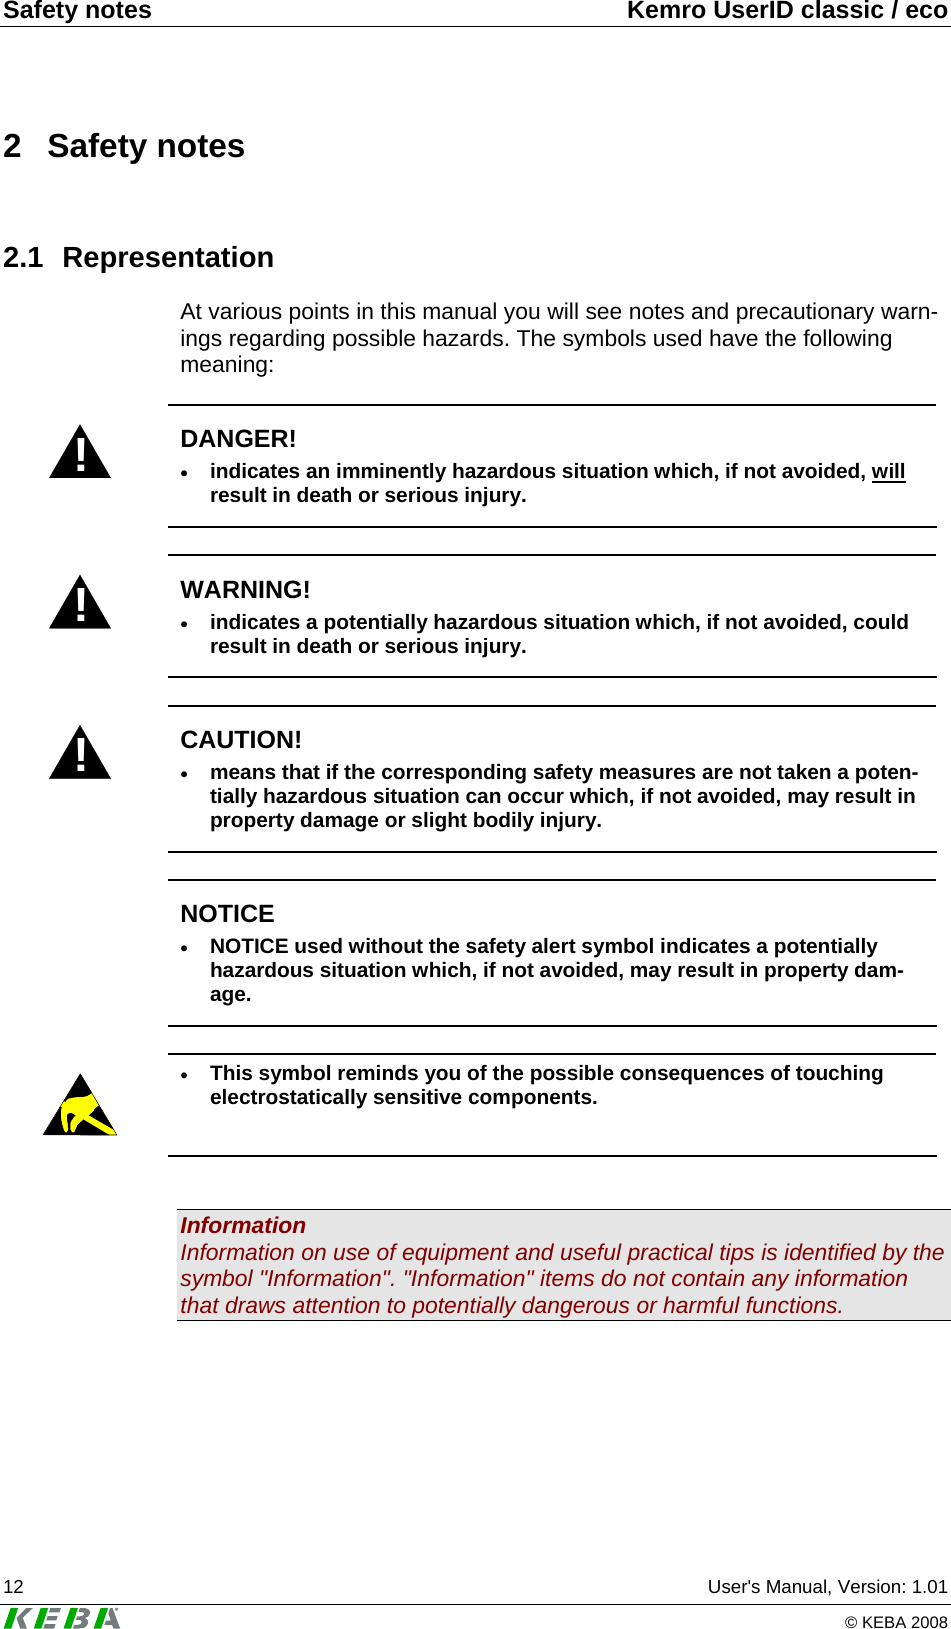 Safety notes  Kemro UserID classic / eco 12  User&apos;s Manual, Version: 1.01   © KEBA 2008 2 Safety notes 2.1 Representation At various points in this manual you will see notes and precautionary warn-ings regarding possible hazards. The symbols used have the following meaning:  ! DANGER! • indicates an imminently hazardous situation which, if not avoided, will result in death or serious injury.  ! WARNING! • indicates a potentially hazardous situation which, if not avoided, could result in death or serious injury.  ! CAUTION! • means that if the corresponding safety measures are not taken a poten-tially hazardous situation can occur which, if not avoided, may result in property damage or slight bodily injury.   NOTICE • NOTICE used without the safety alert symbol indicates a potentially hazardous situation which, if not avoided, may result in property dam-age.   • This symbol reminds you of the possible consequences of touching electrostatically sensitive components.   Information Information on use of equipment and useful practical tips is identified by the symbol &quot;Information&quot;. &quot;Information&quot; items do not contain any information that draws attention to potentially dangerous or harmful functions.  